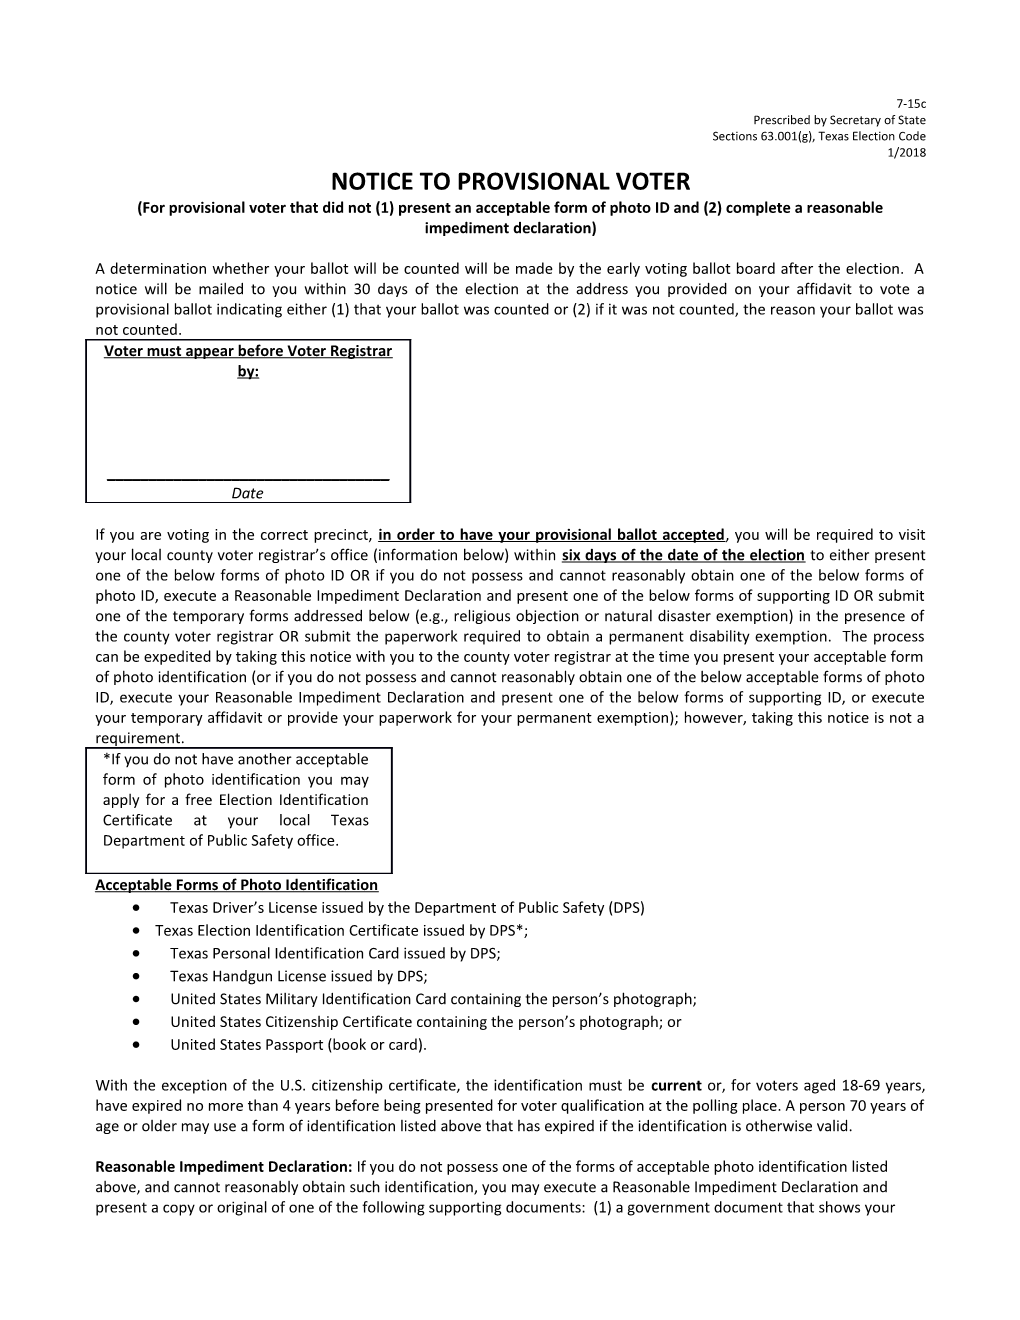 Sections 63.001(G), Texas Election Code